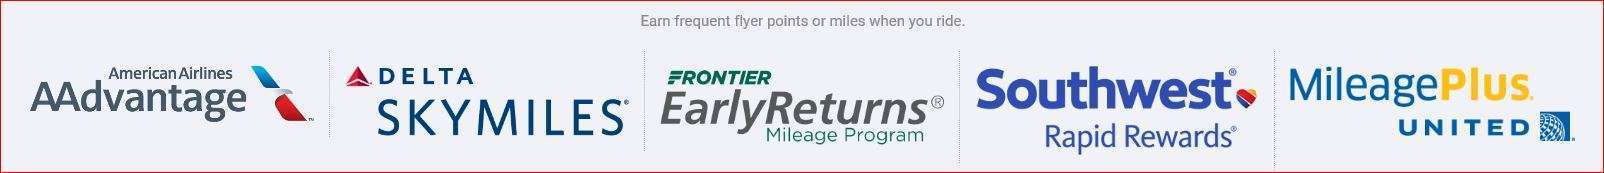 frequent flyer miles